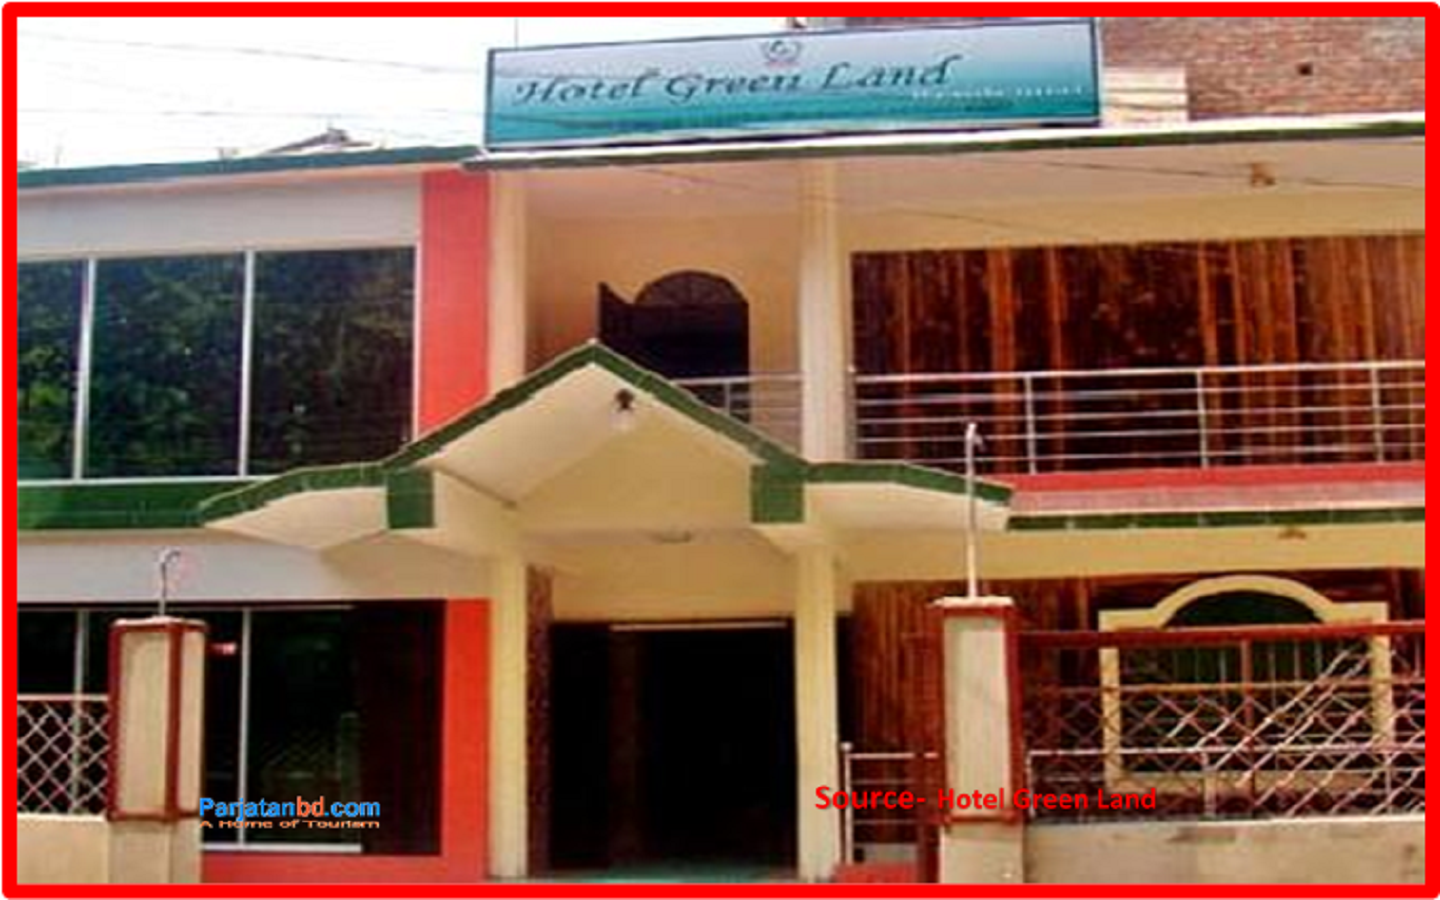 Hotel Green Land Picture-1